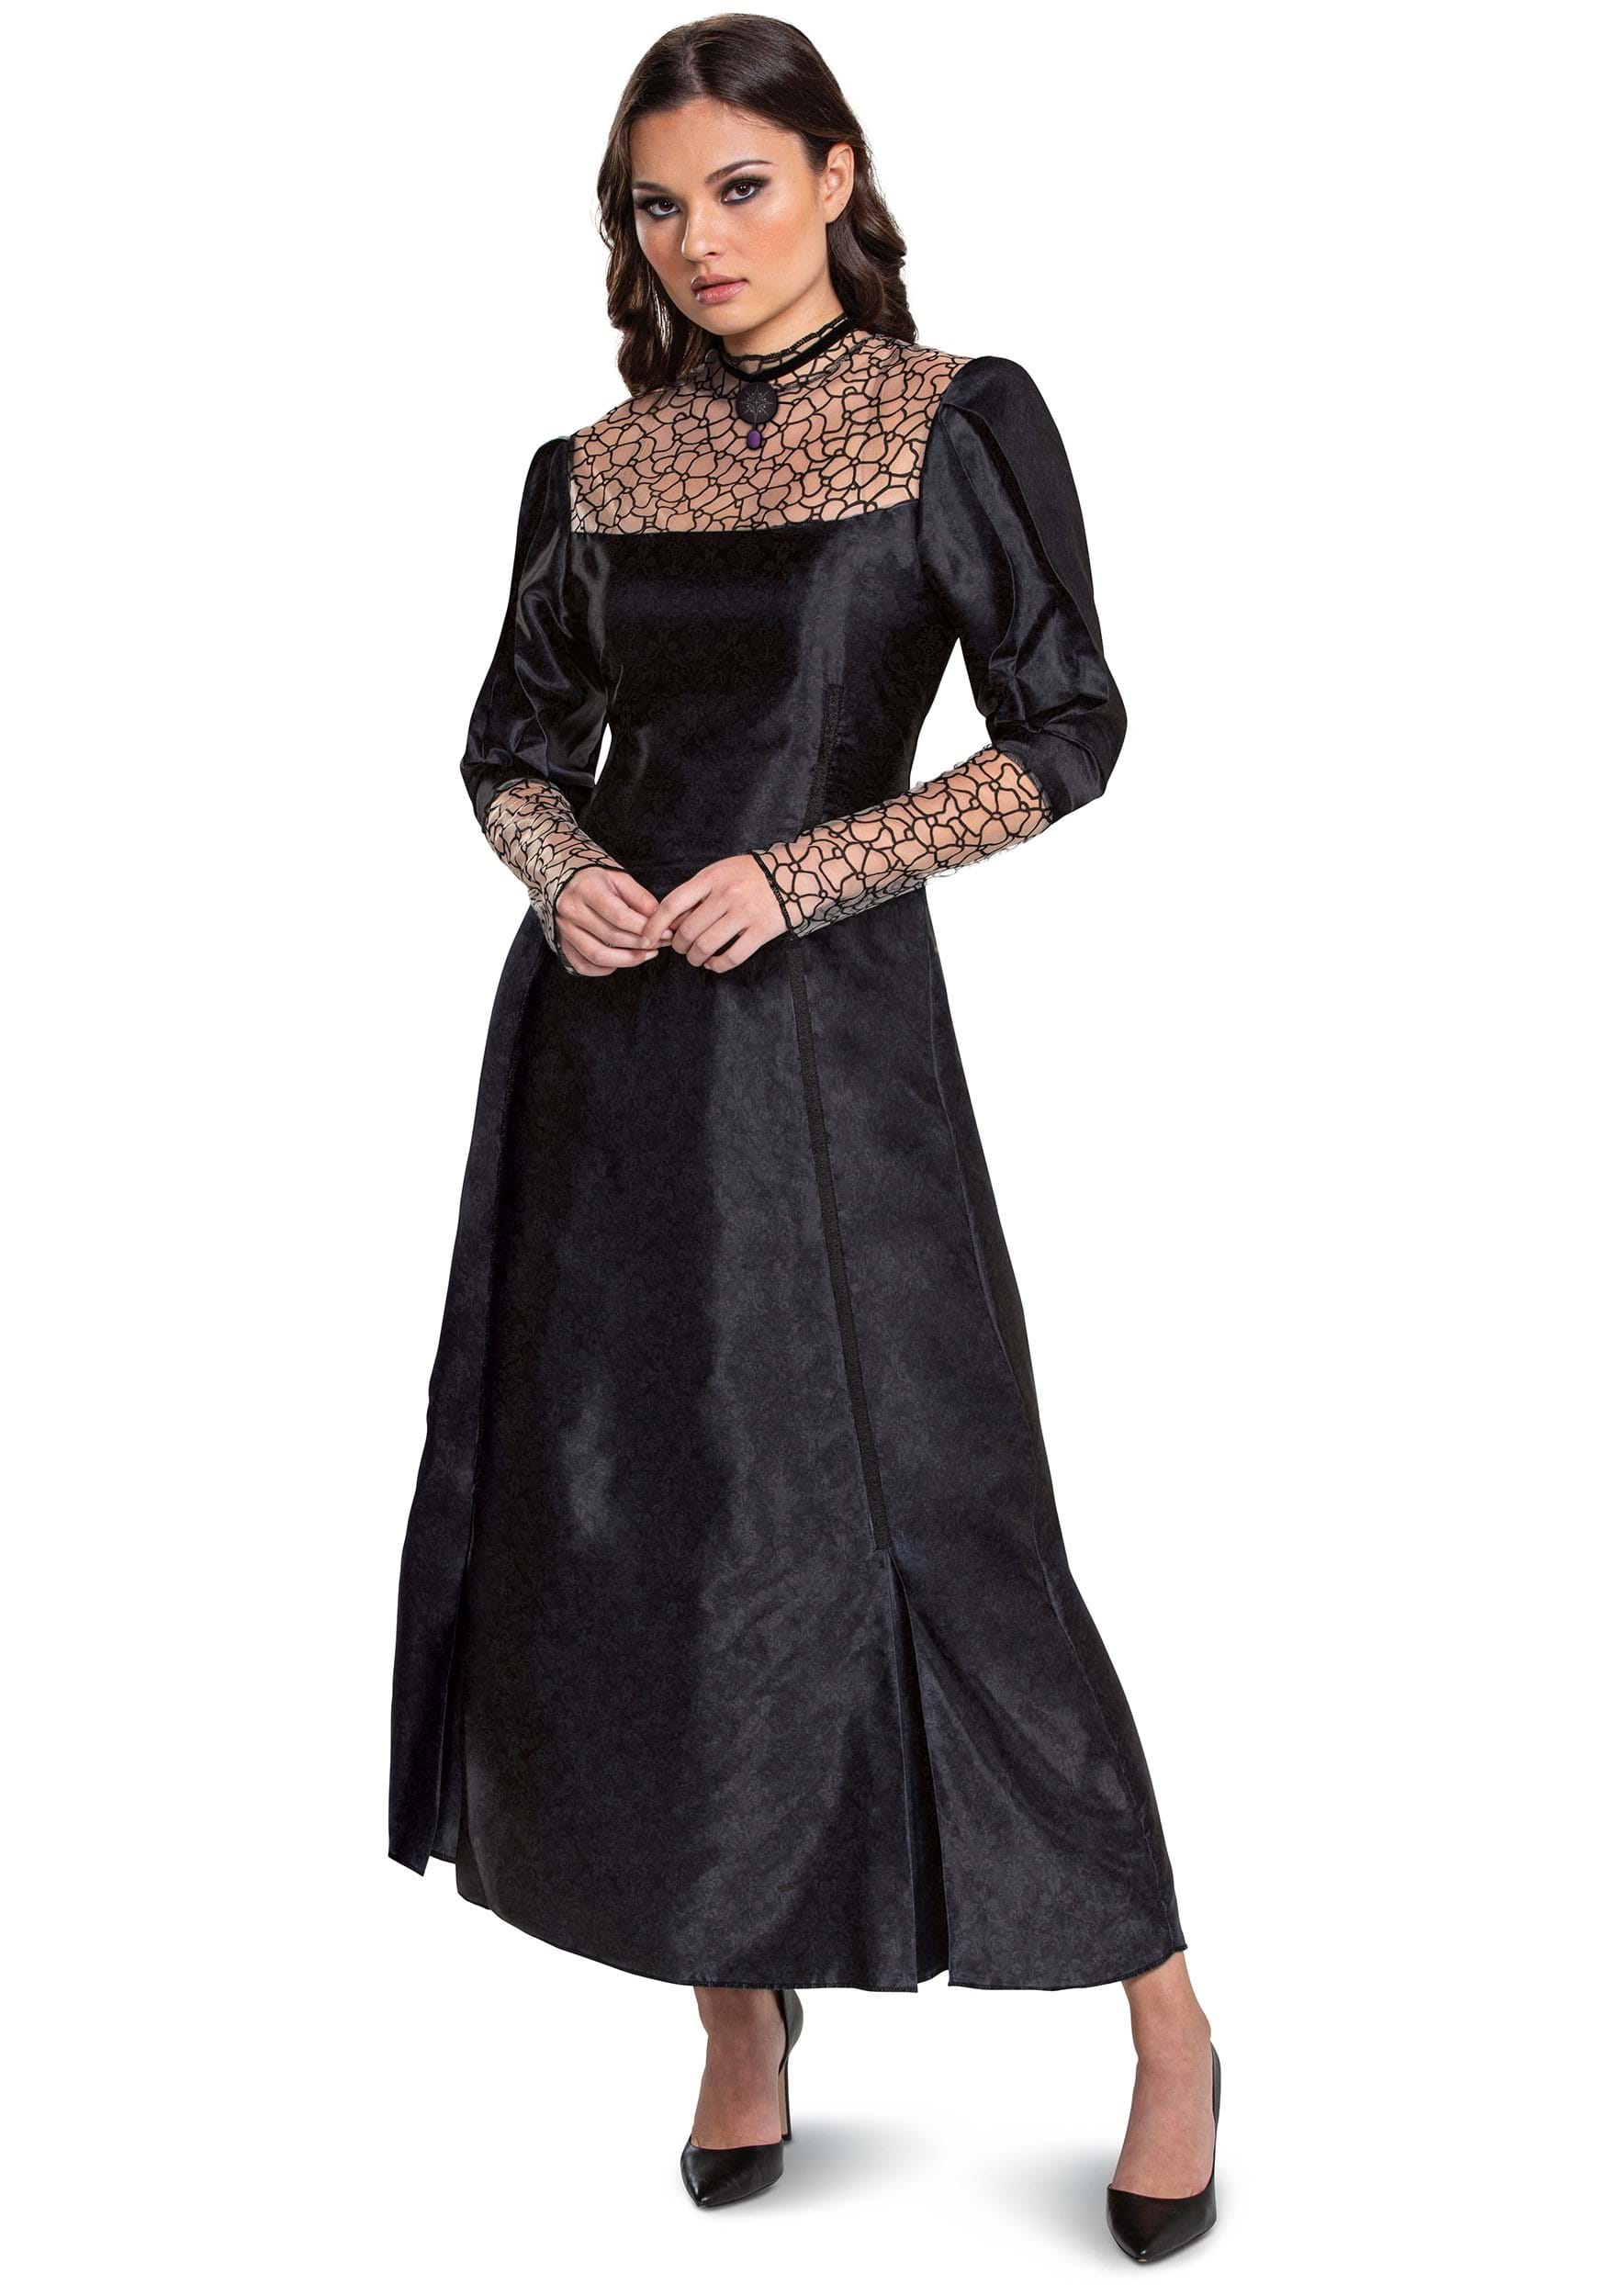 Image of Women's The Witcher Classic Yennefer Costume ID DI123819-L